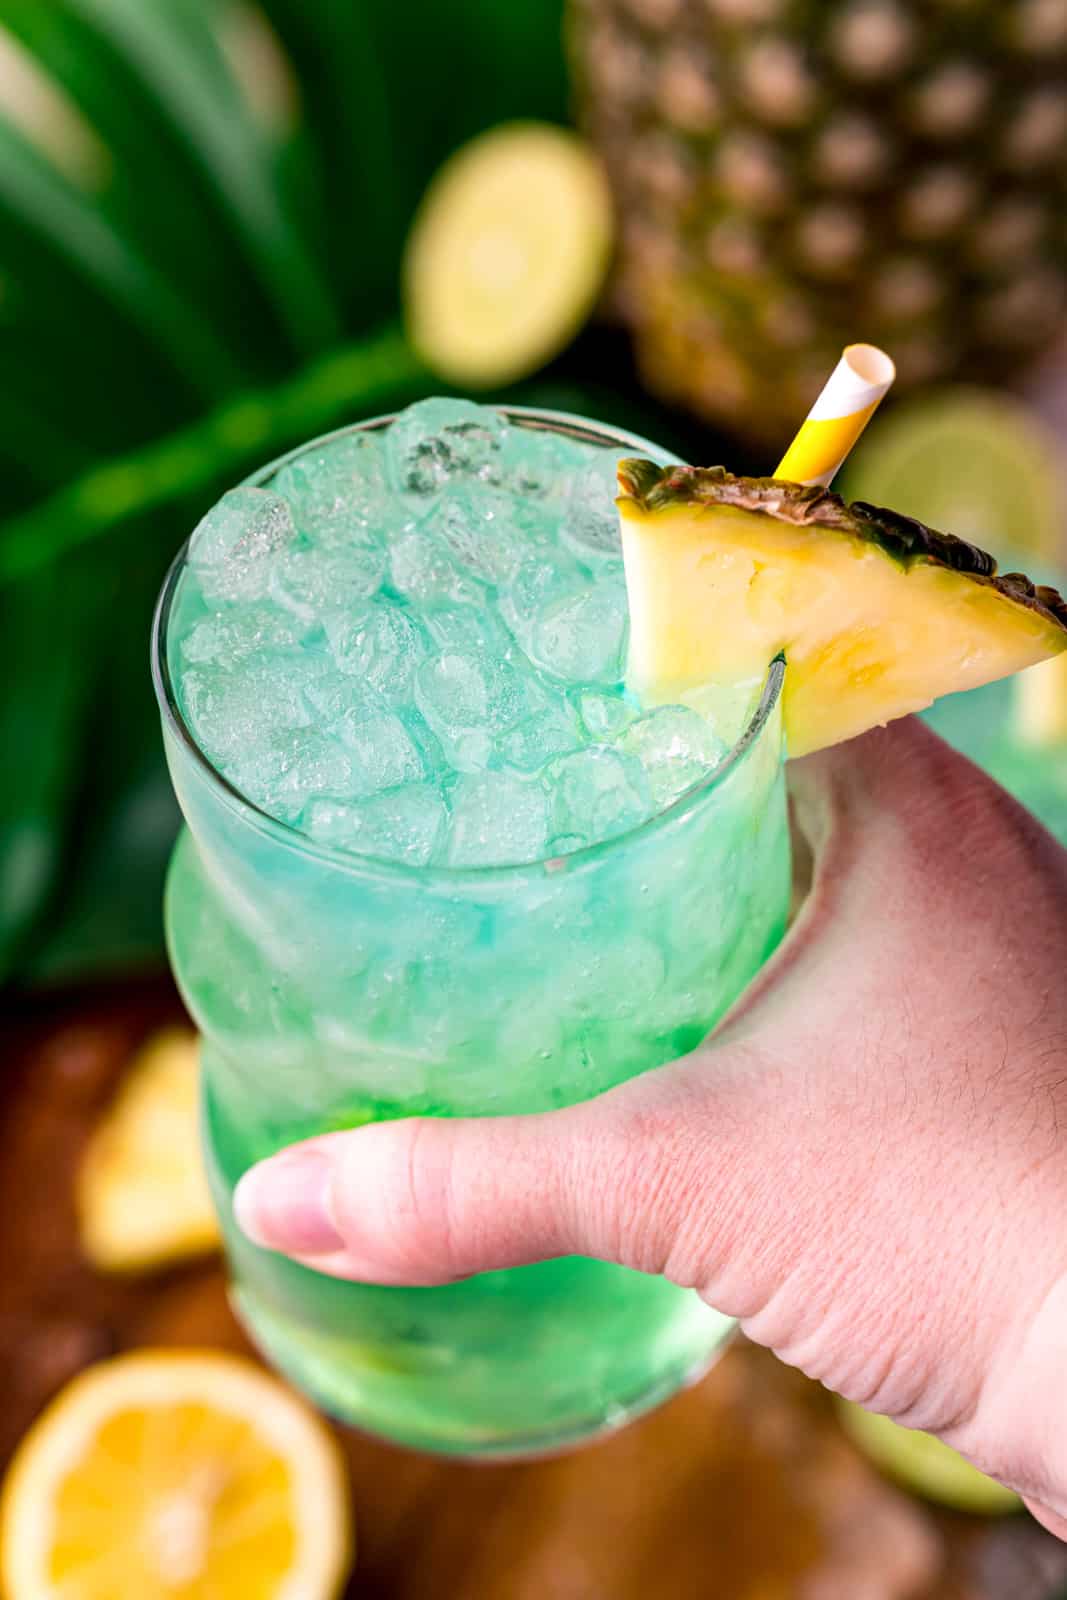 Hand holding up finished drink showing pineapple garnish